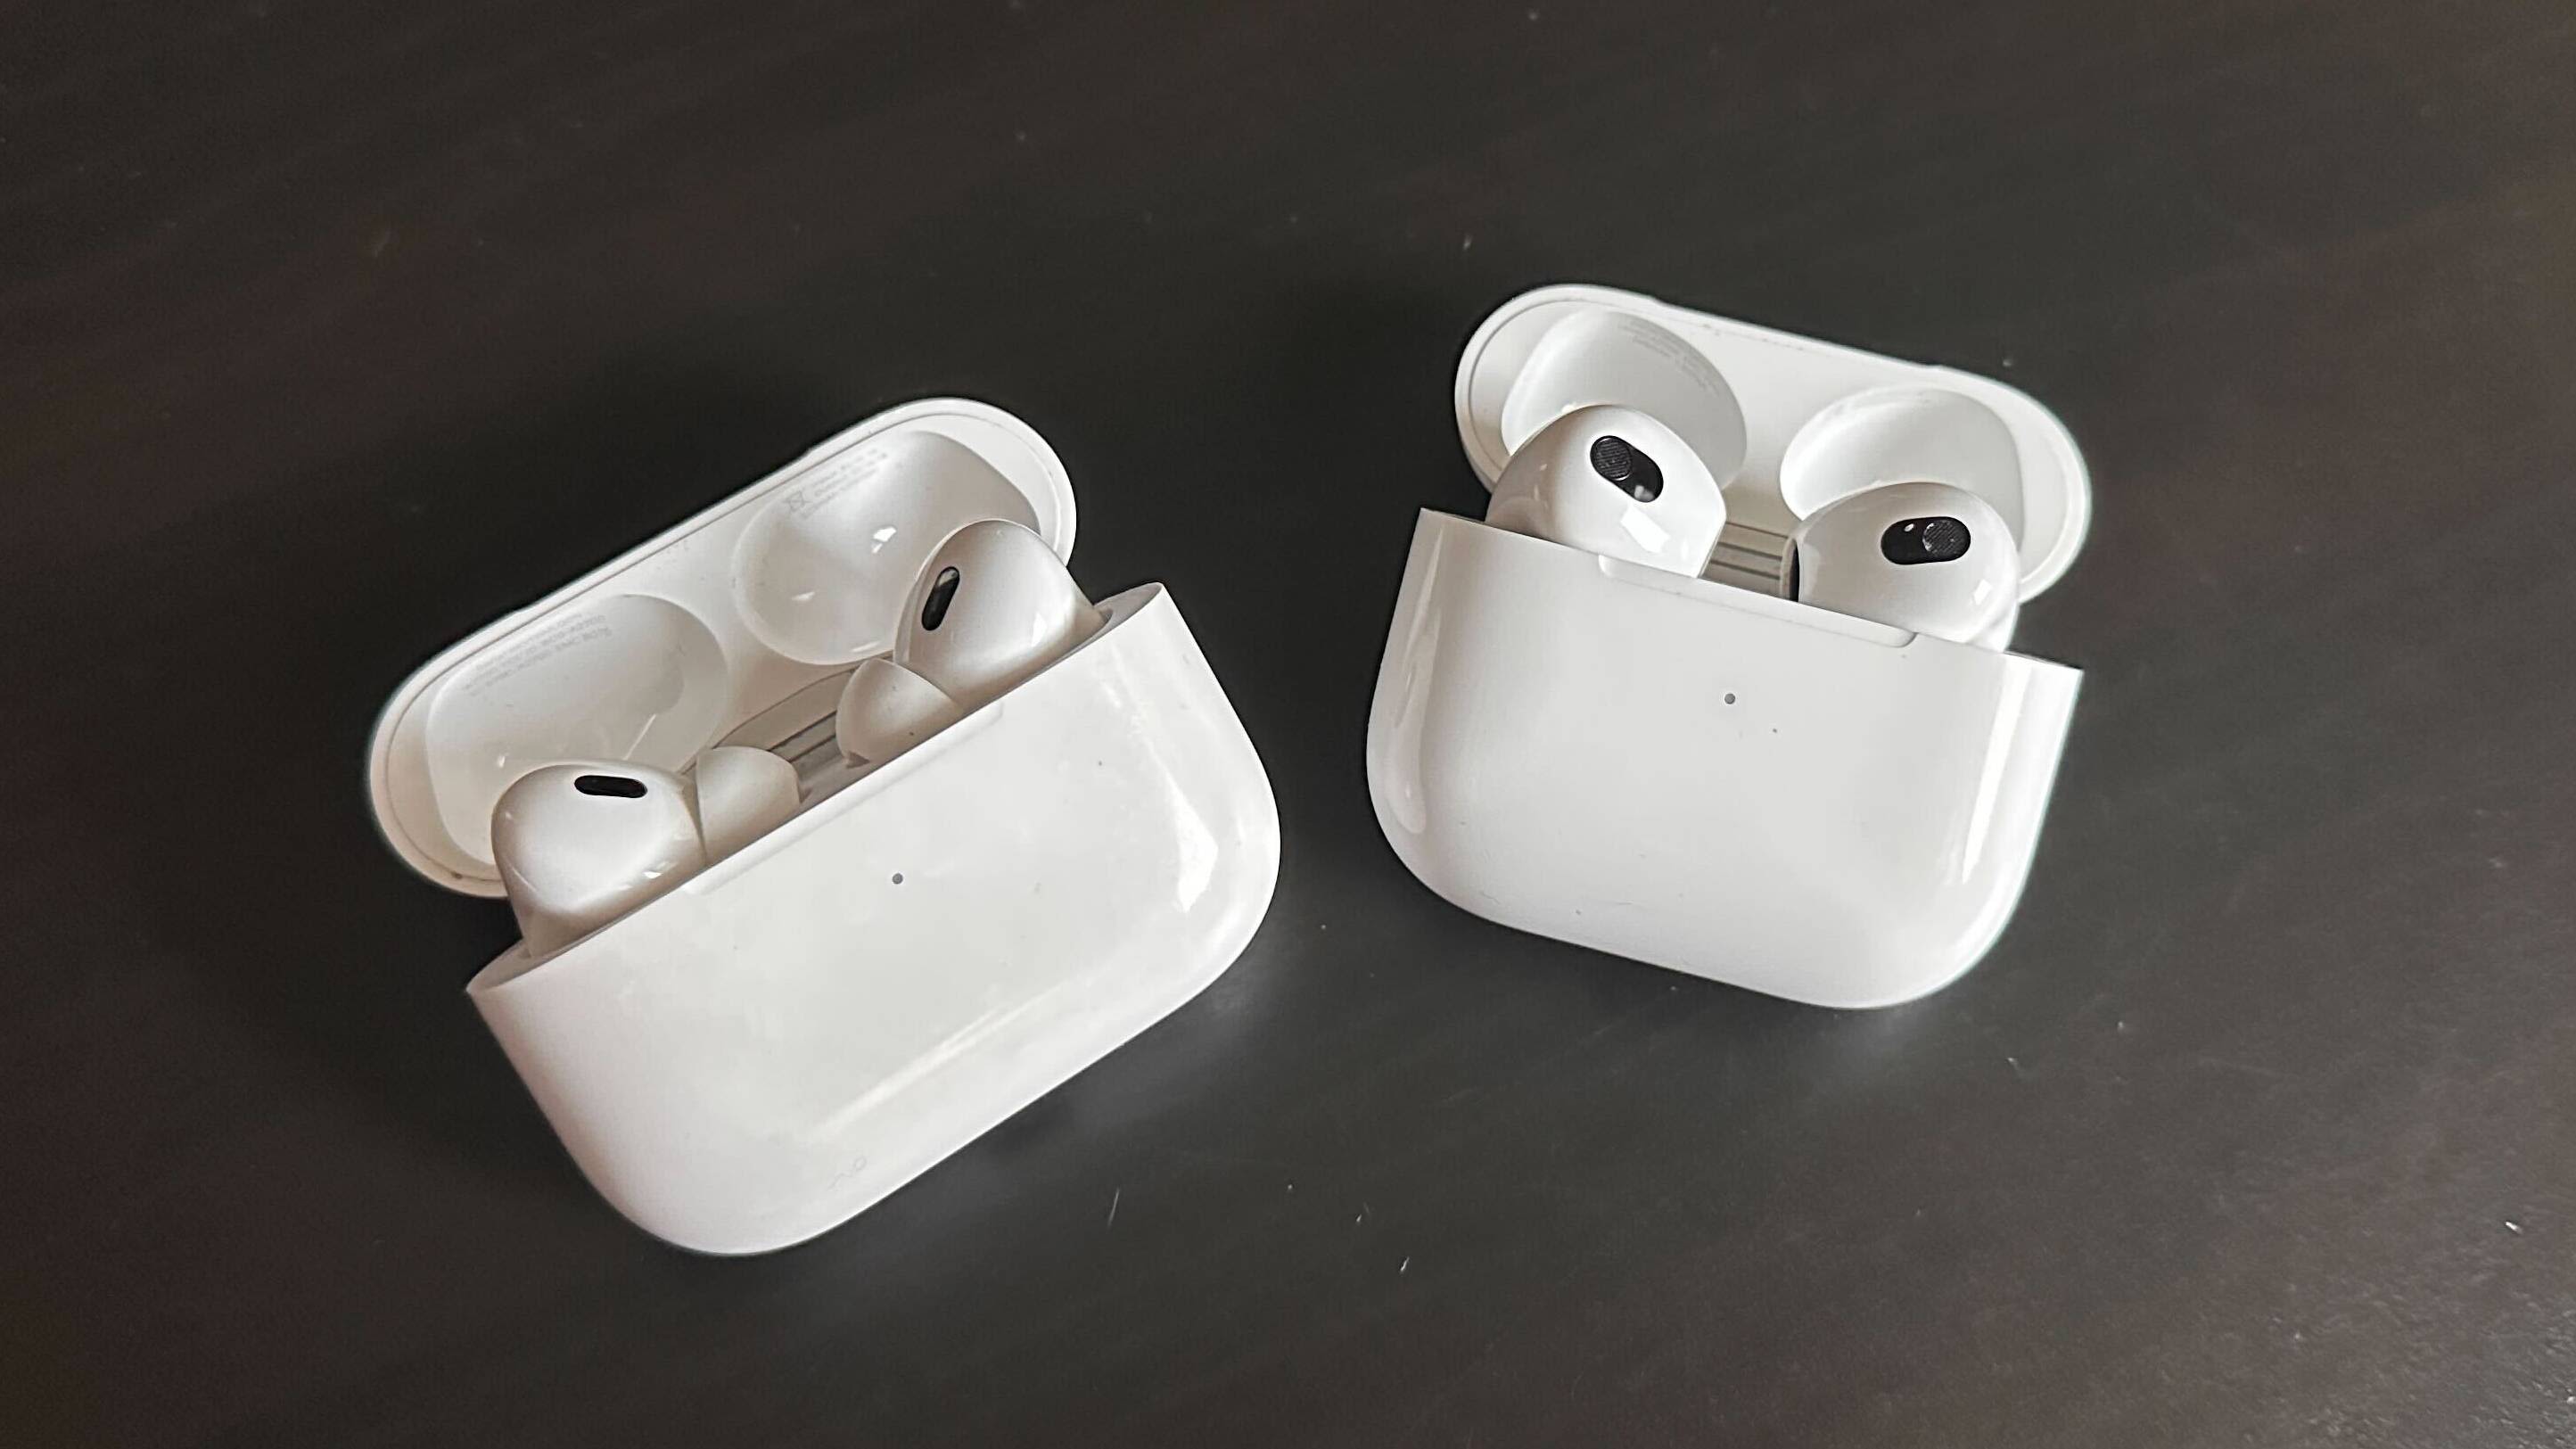 AirPods 2 vs AirPods 3 vs AirPods Pro: What's different and which